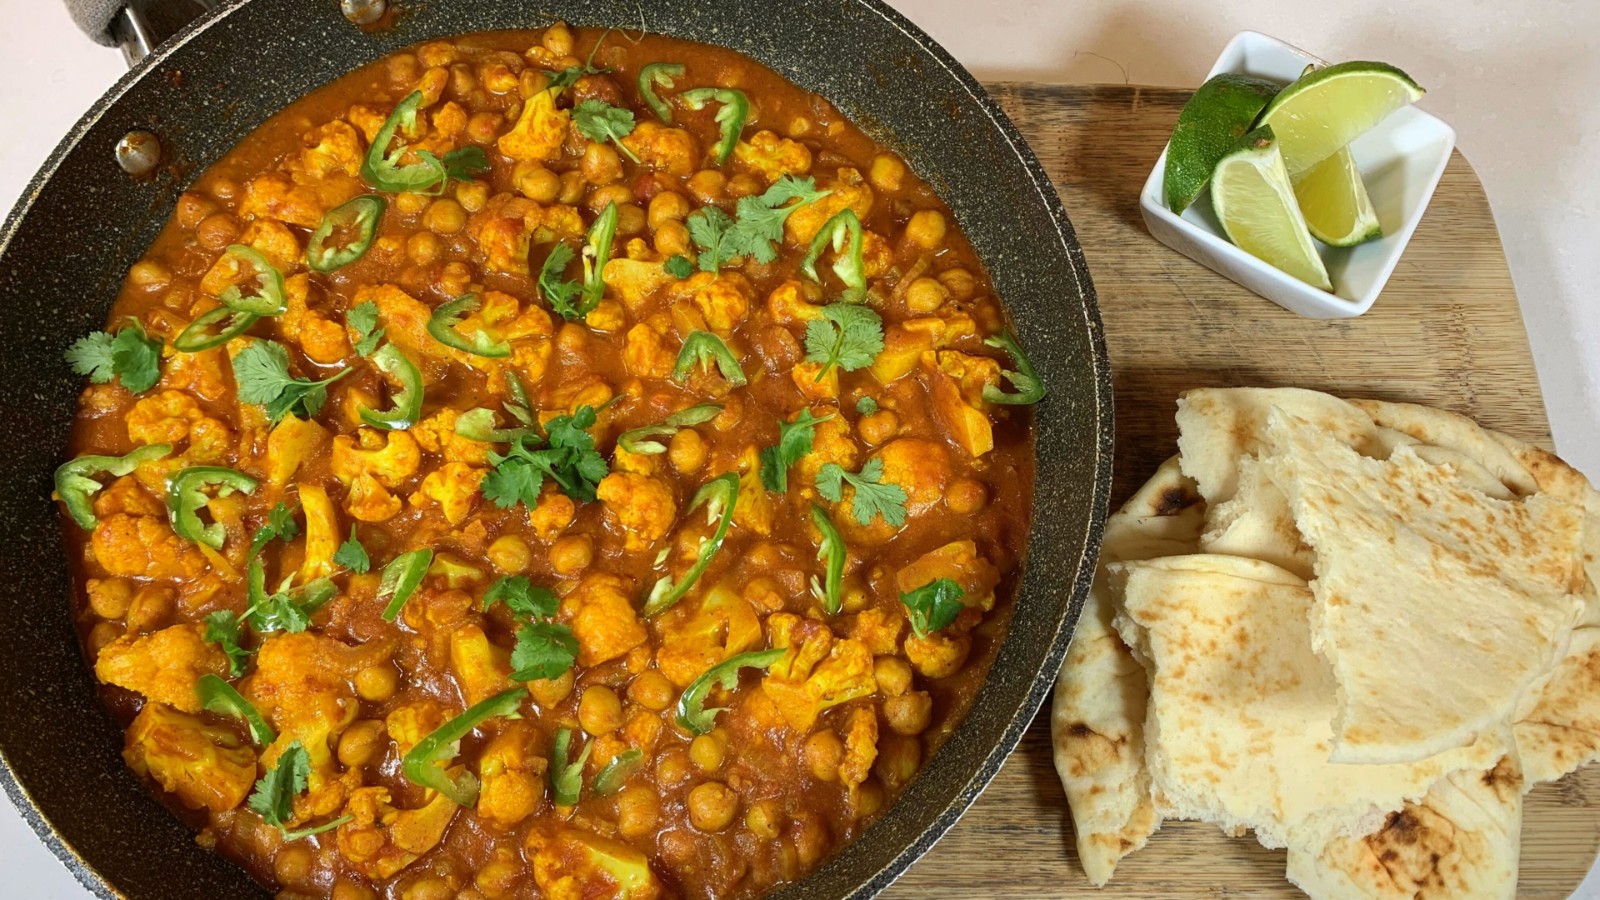 Image of Chickpea and Cauliflower in Curry with Naan Bread 